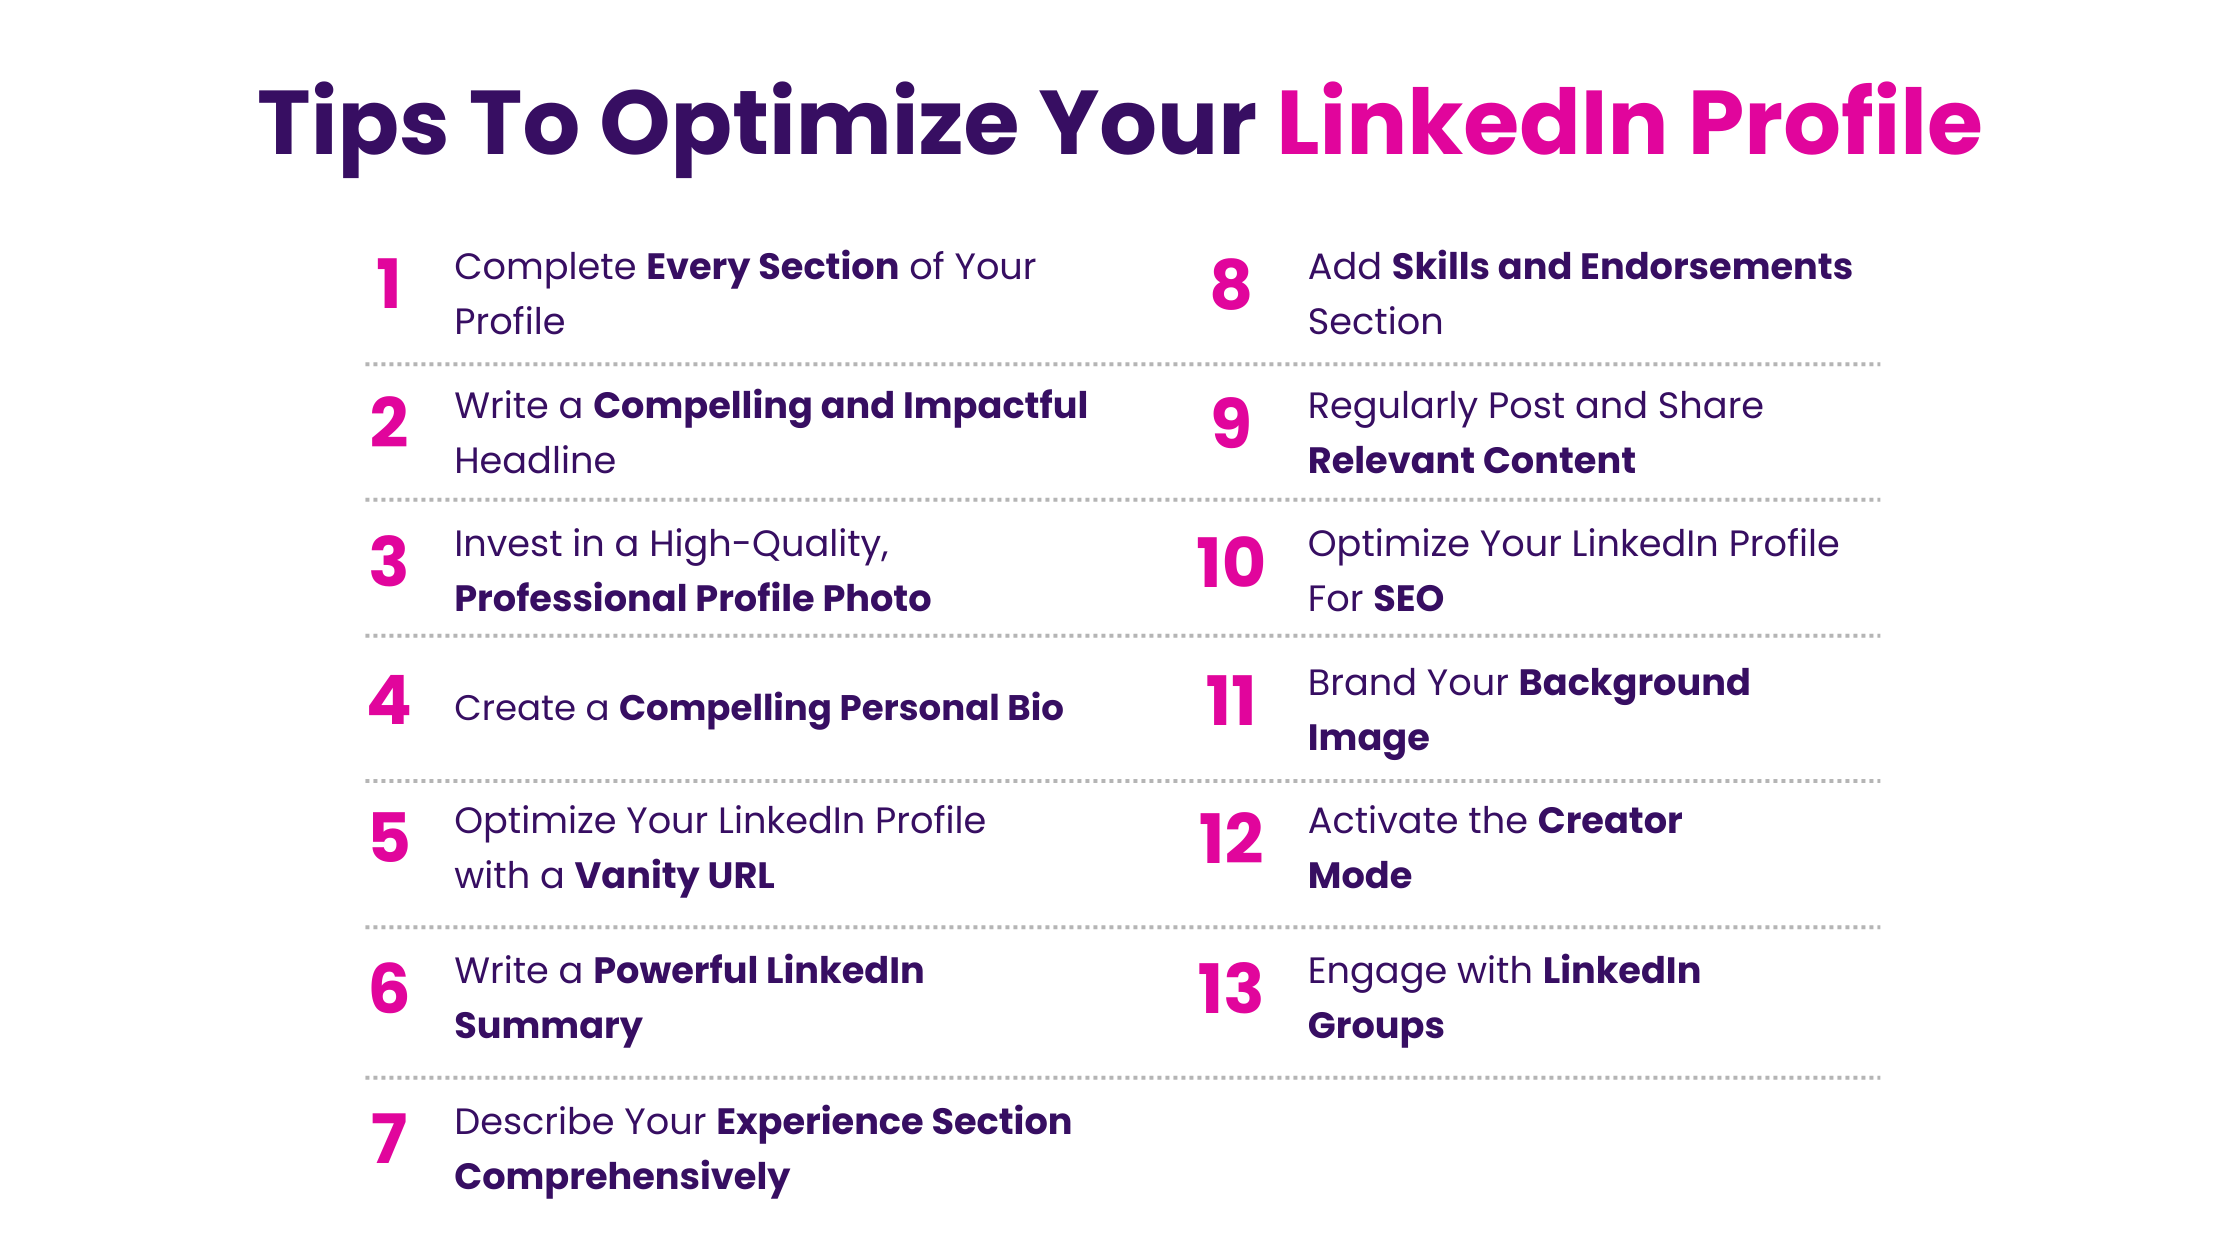 Tips To Optimize Your LinkedIn Profile